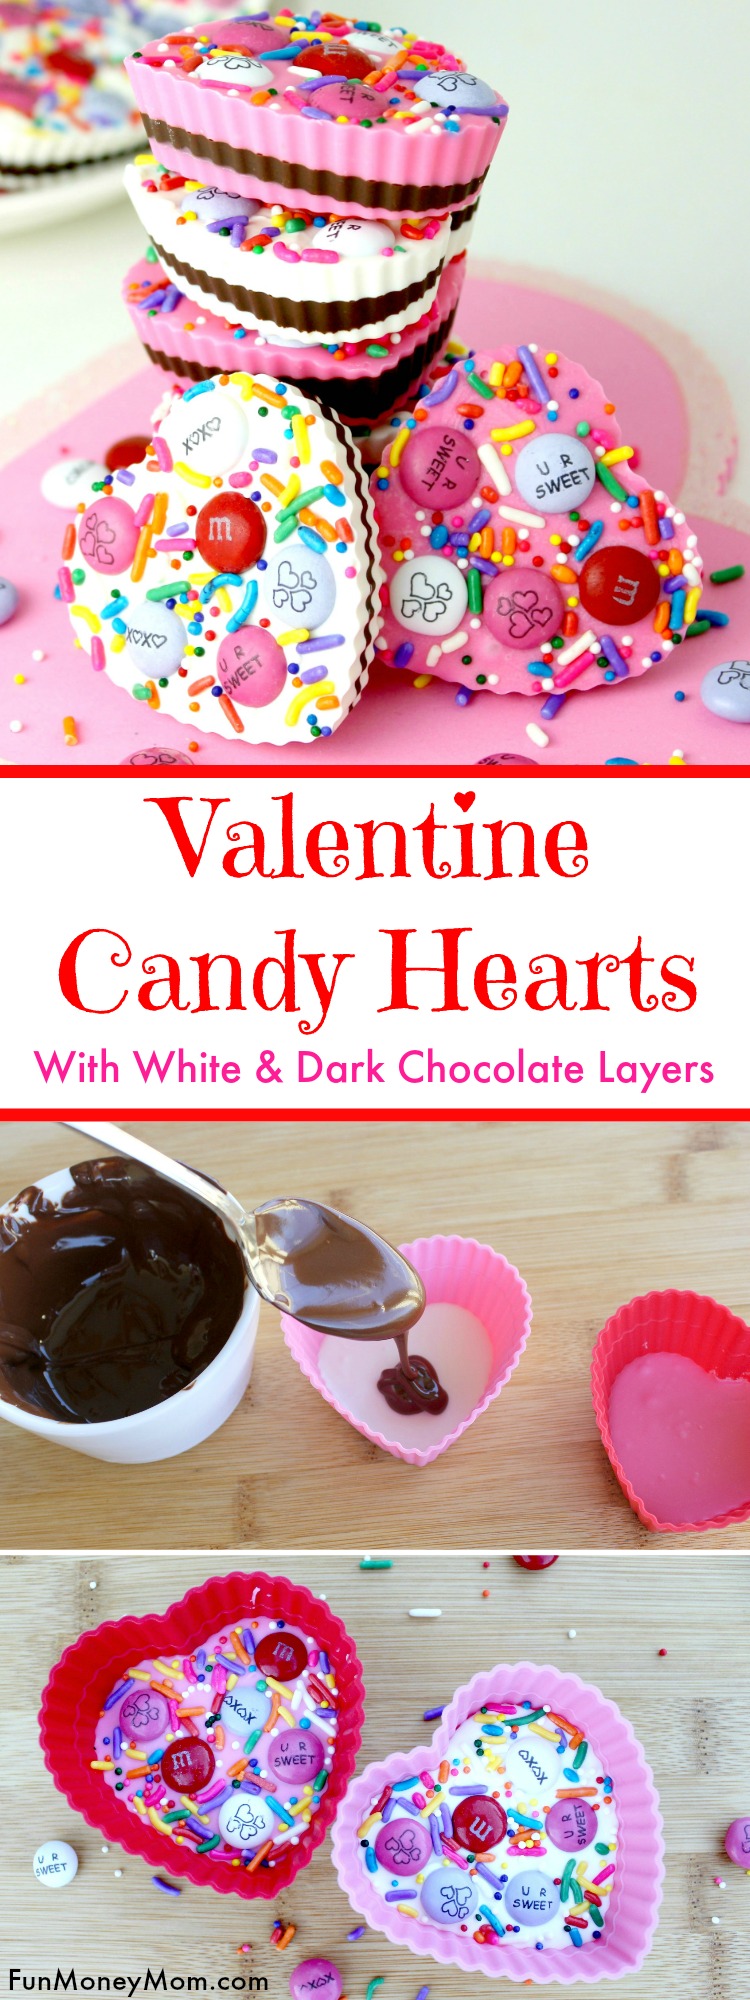 Valentine Candy Hearts With Chocolate Layers | Fun Money Mom